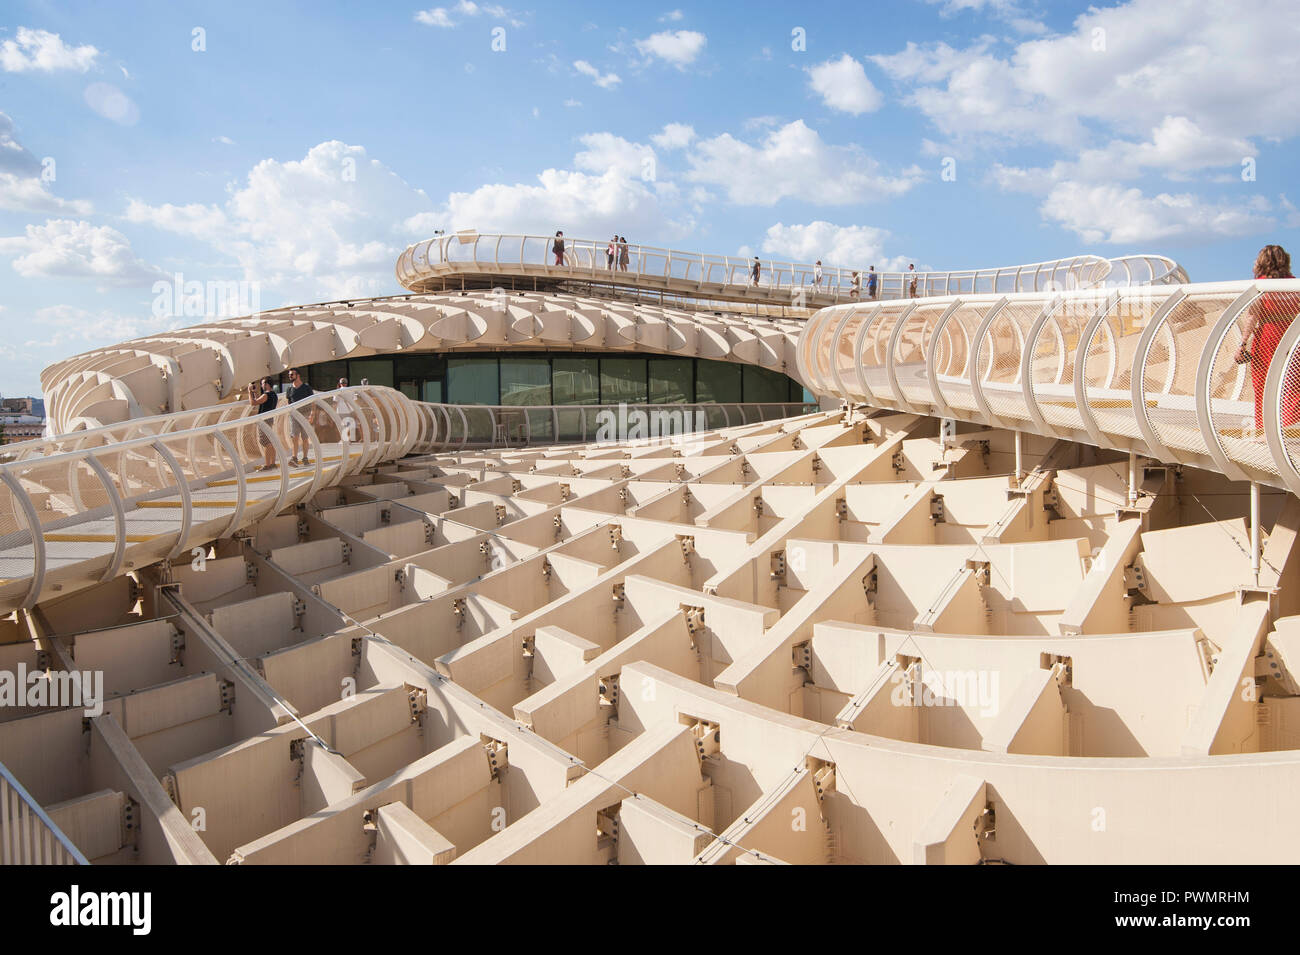 SPAIN, SEVILLE:Metropol Parasol is a wooden structure located at La Encarnación square, in the old quarter of Seville, Spain. It was designed by the G Stock Photo